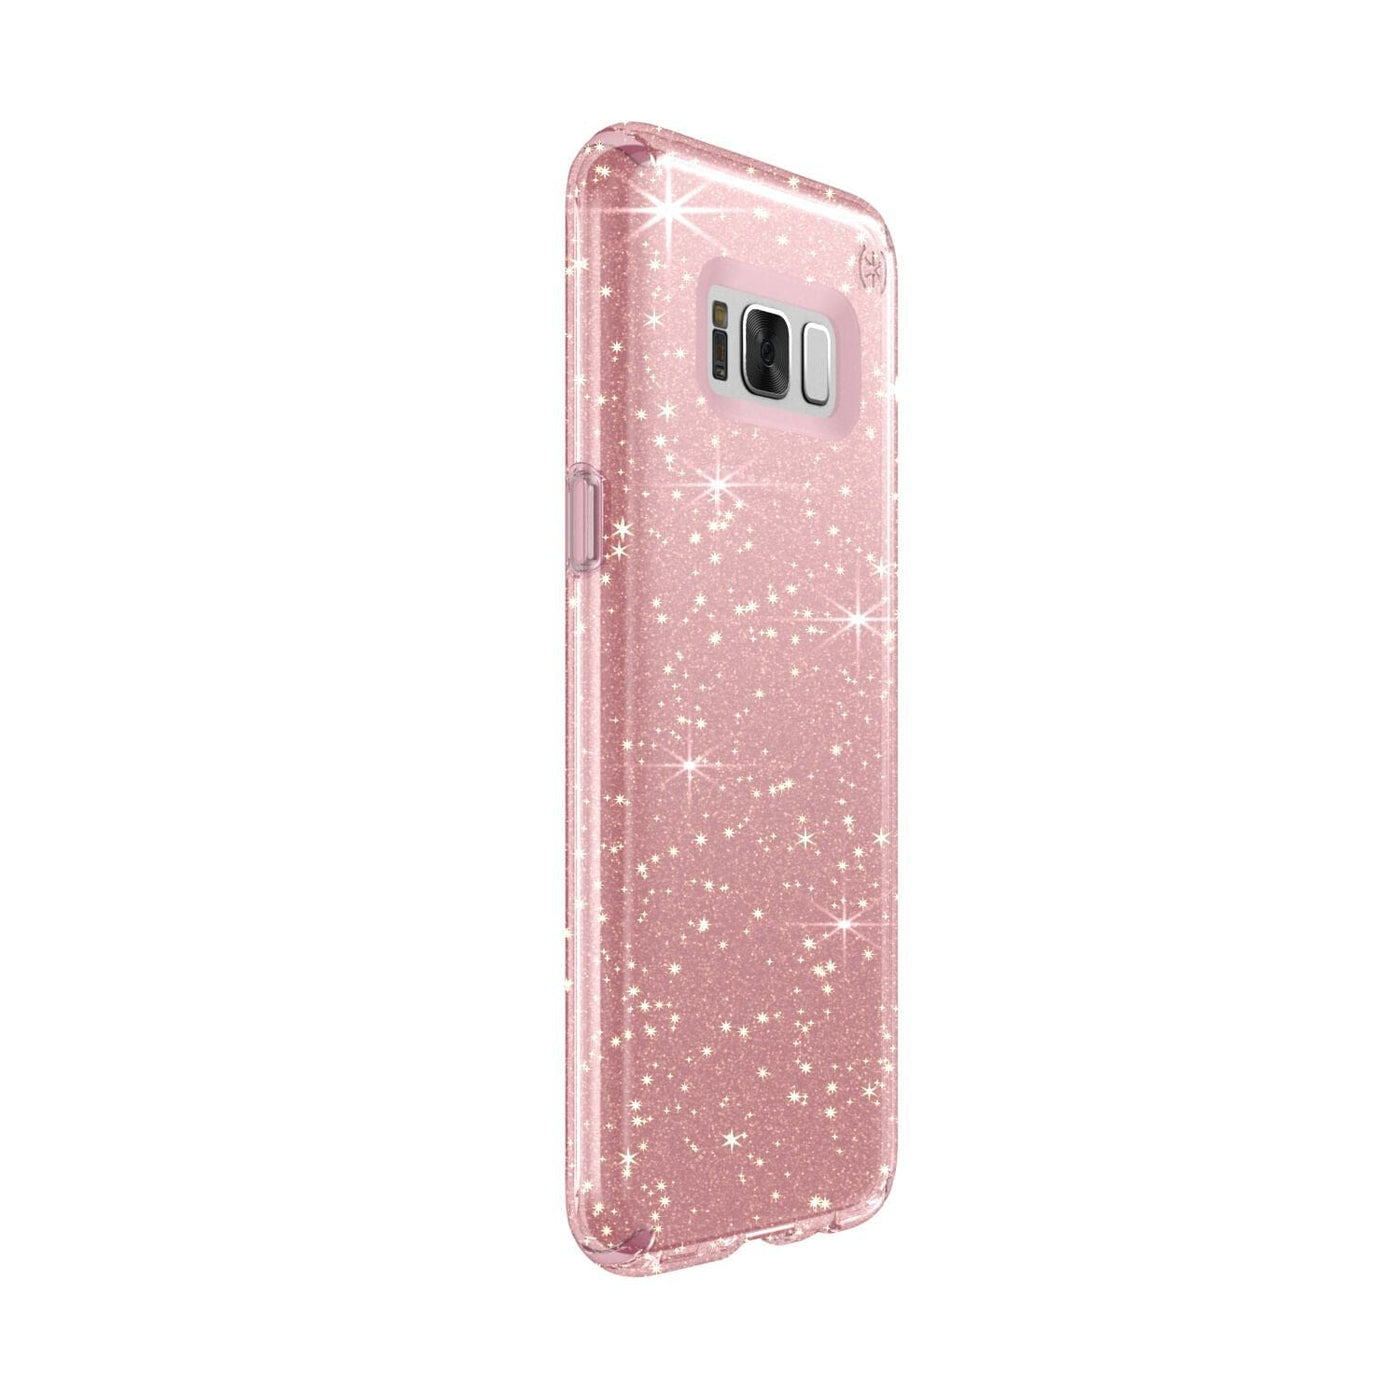 Galaxy S8+ Cool summery Holiday Glasses Case